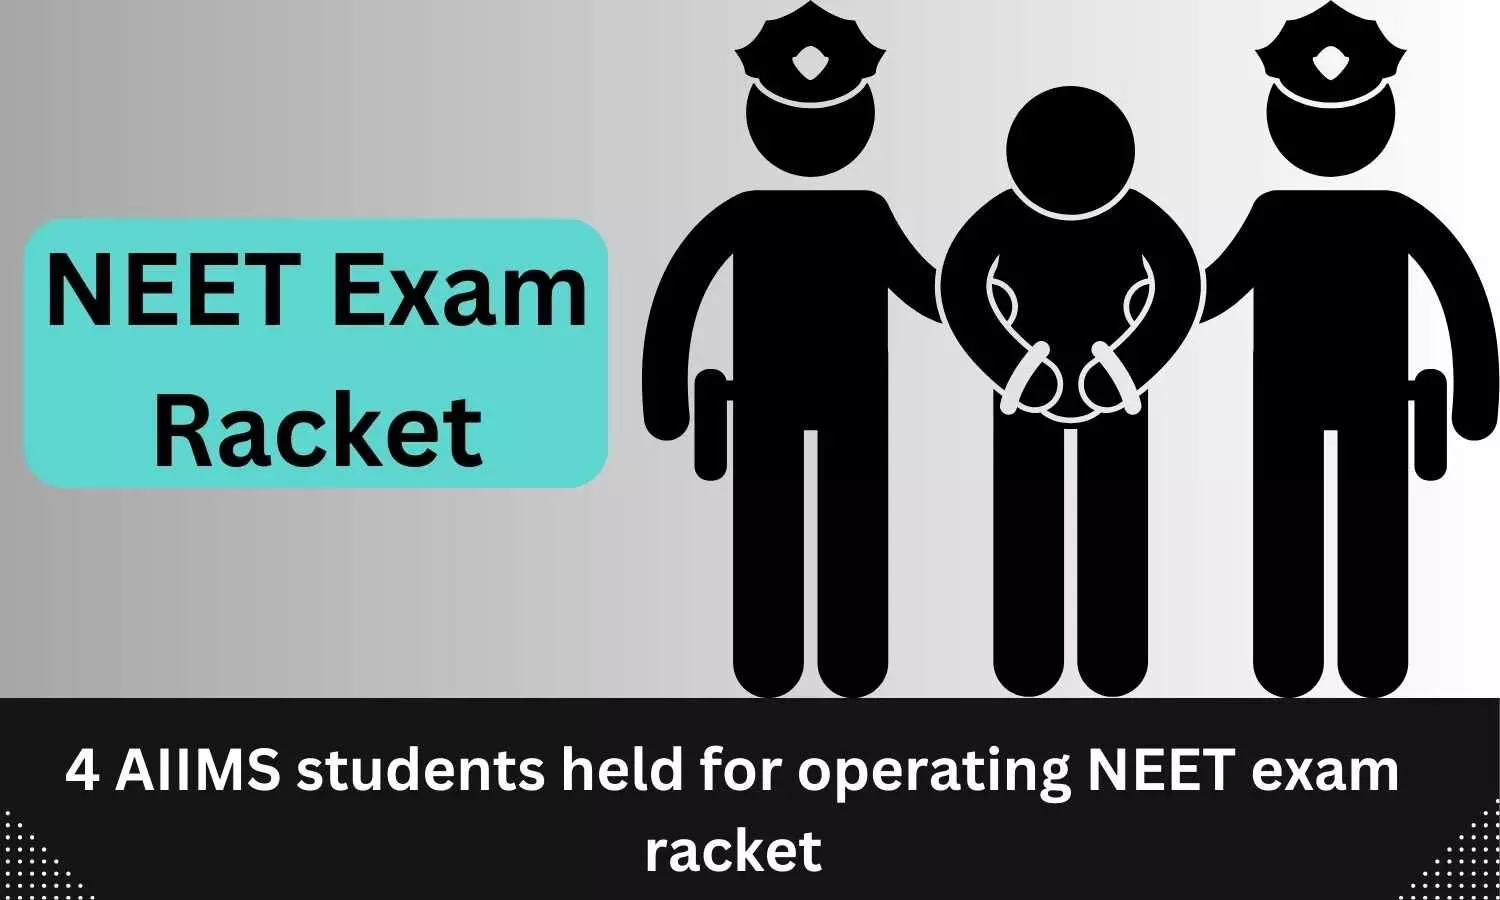 Illegal NEET exam racket busted, 4 AIIMS medical students held